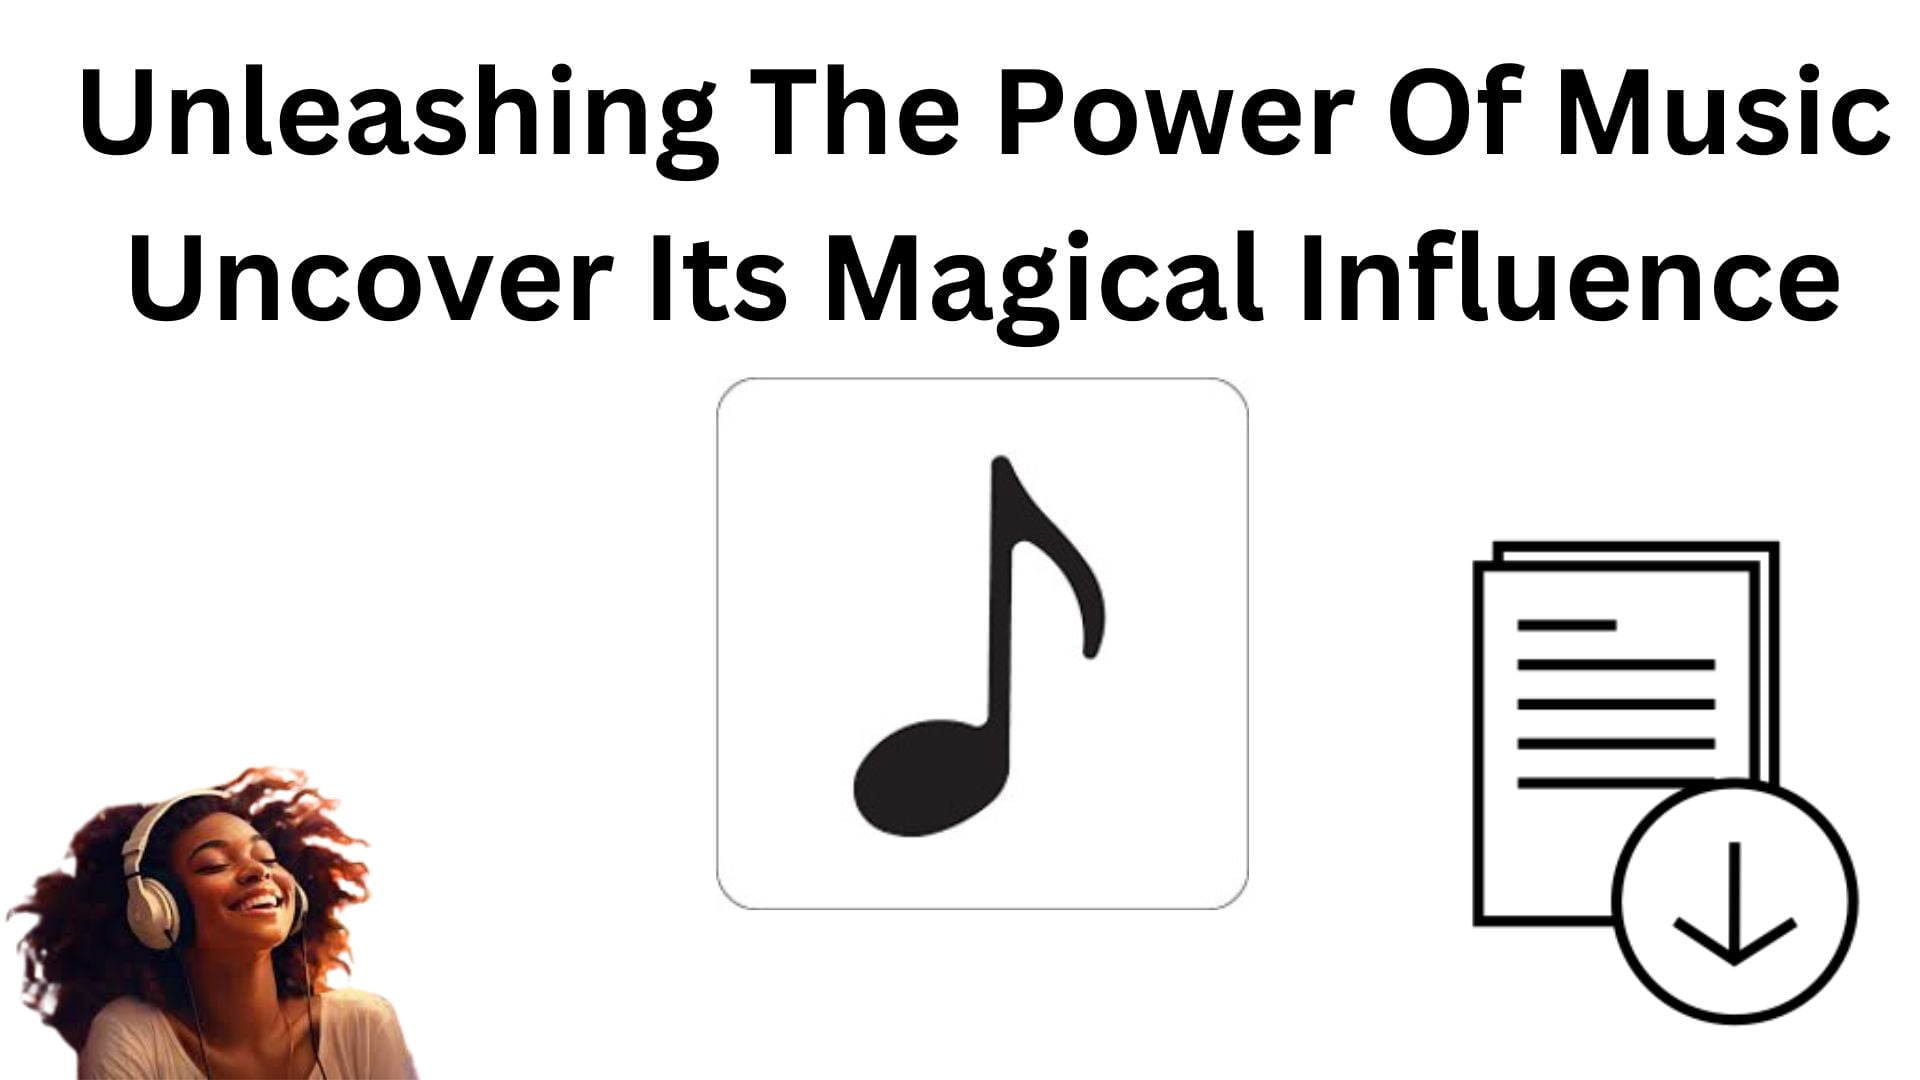 Unleashing The Power Of Music Uncover Its Magical Influence